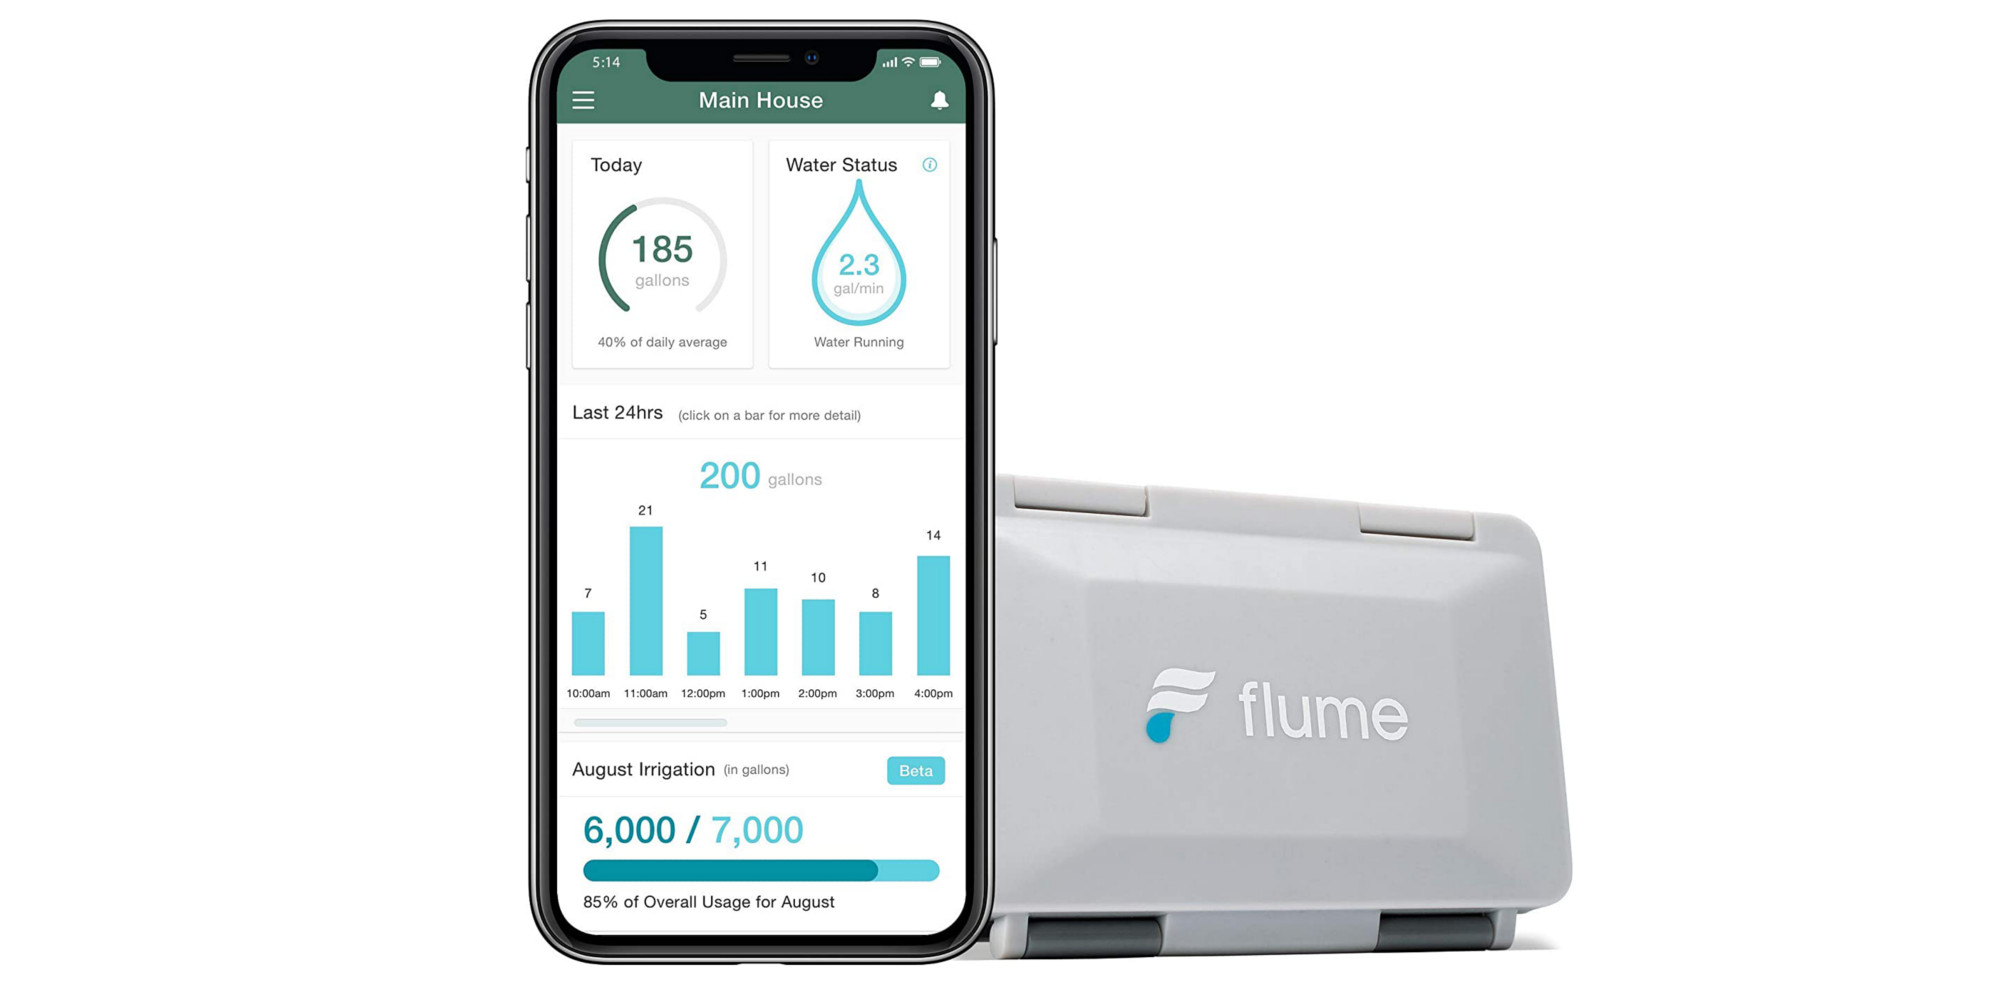 flume-2-smart-home-water-monitor-and-leak-detector-now-149-shipped